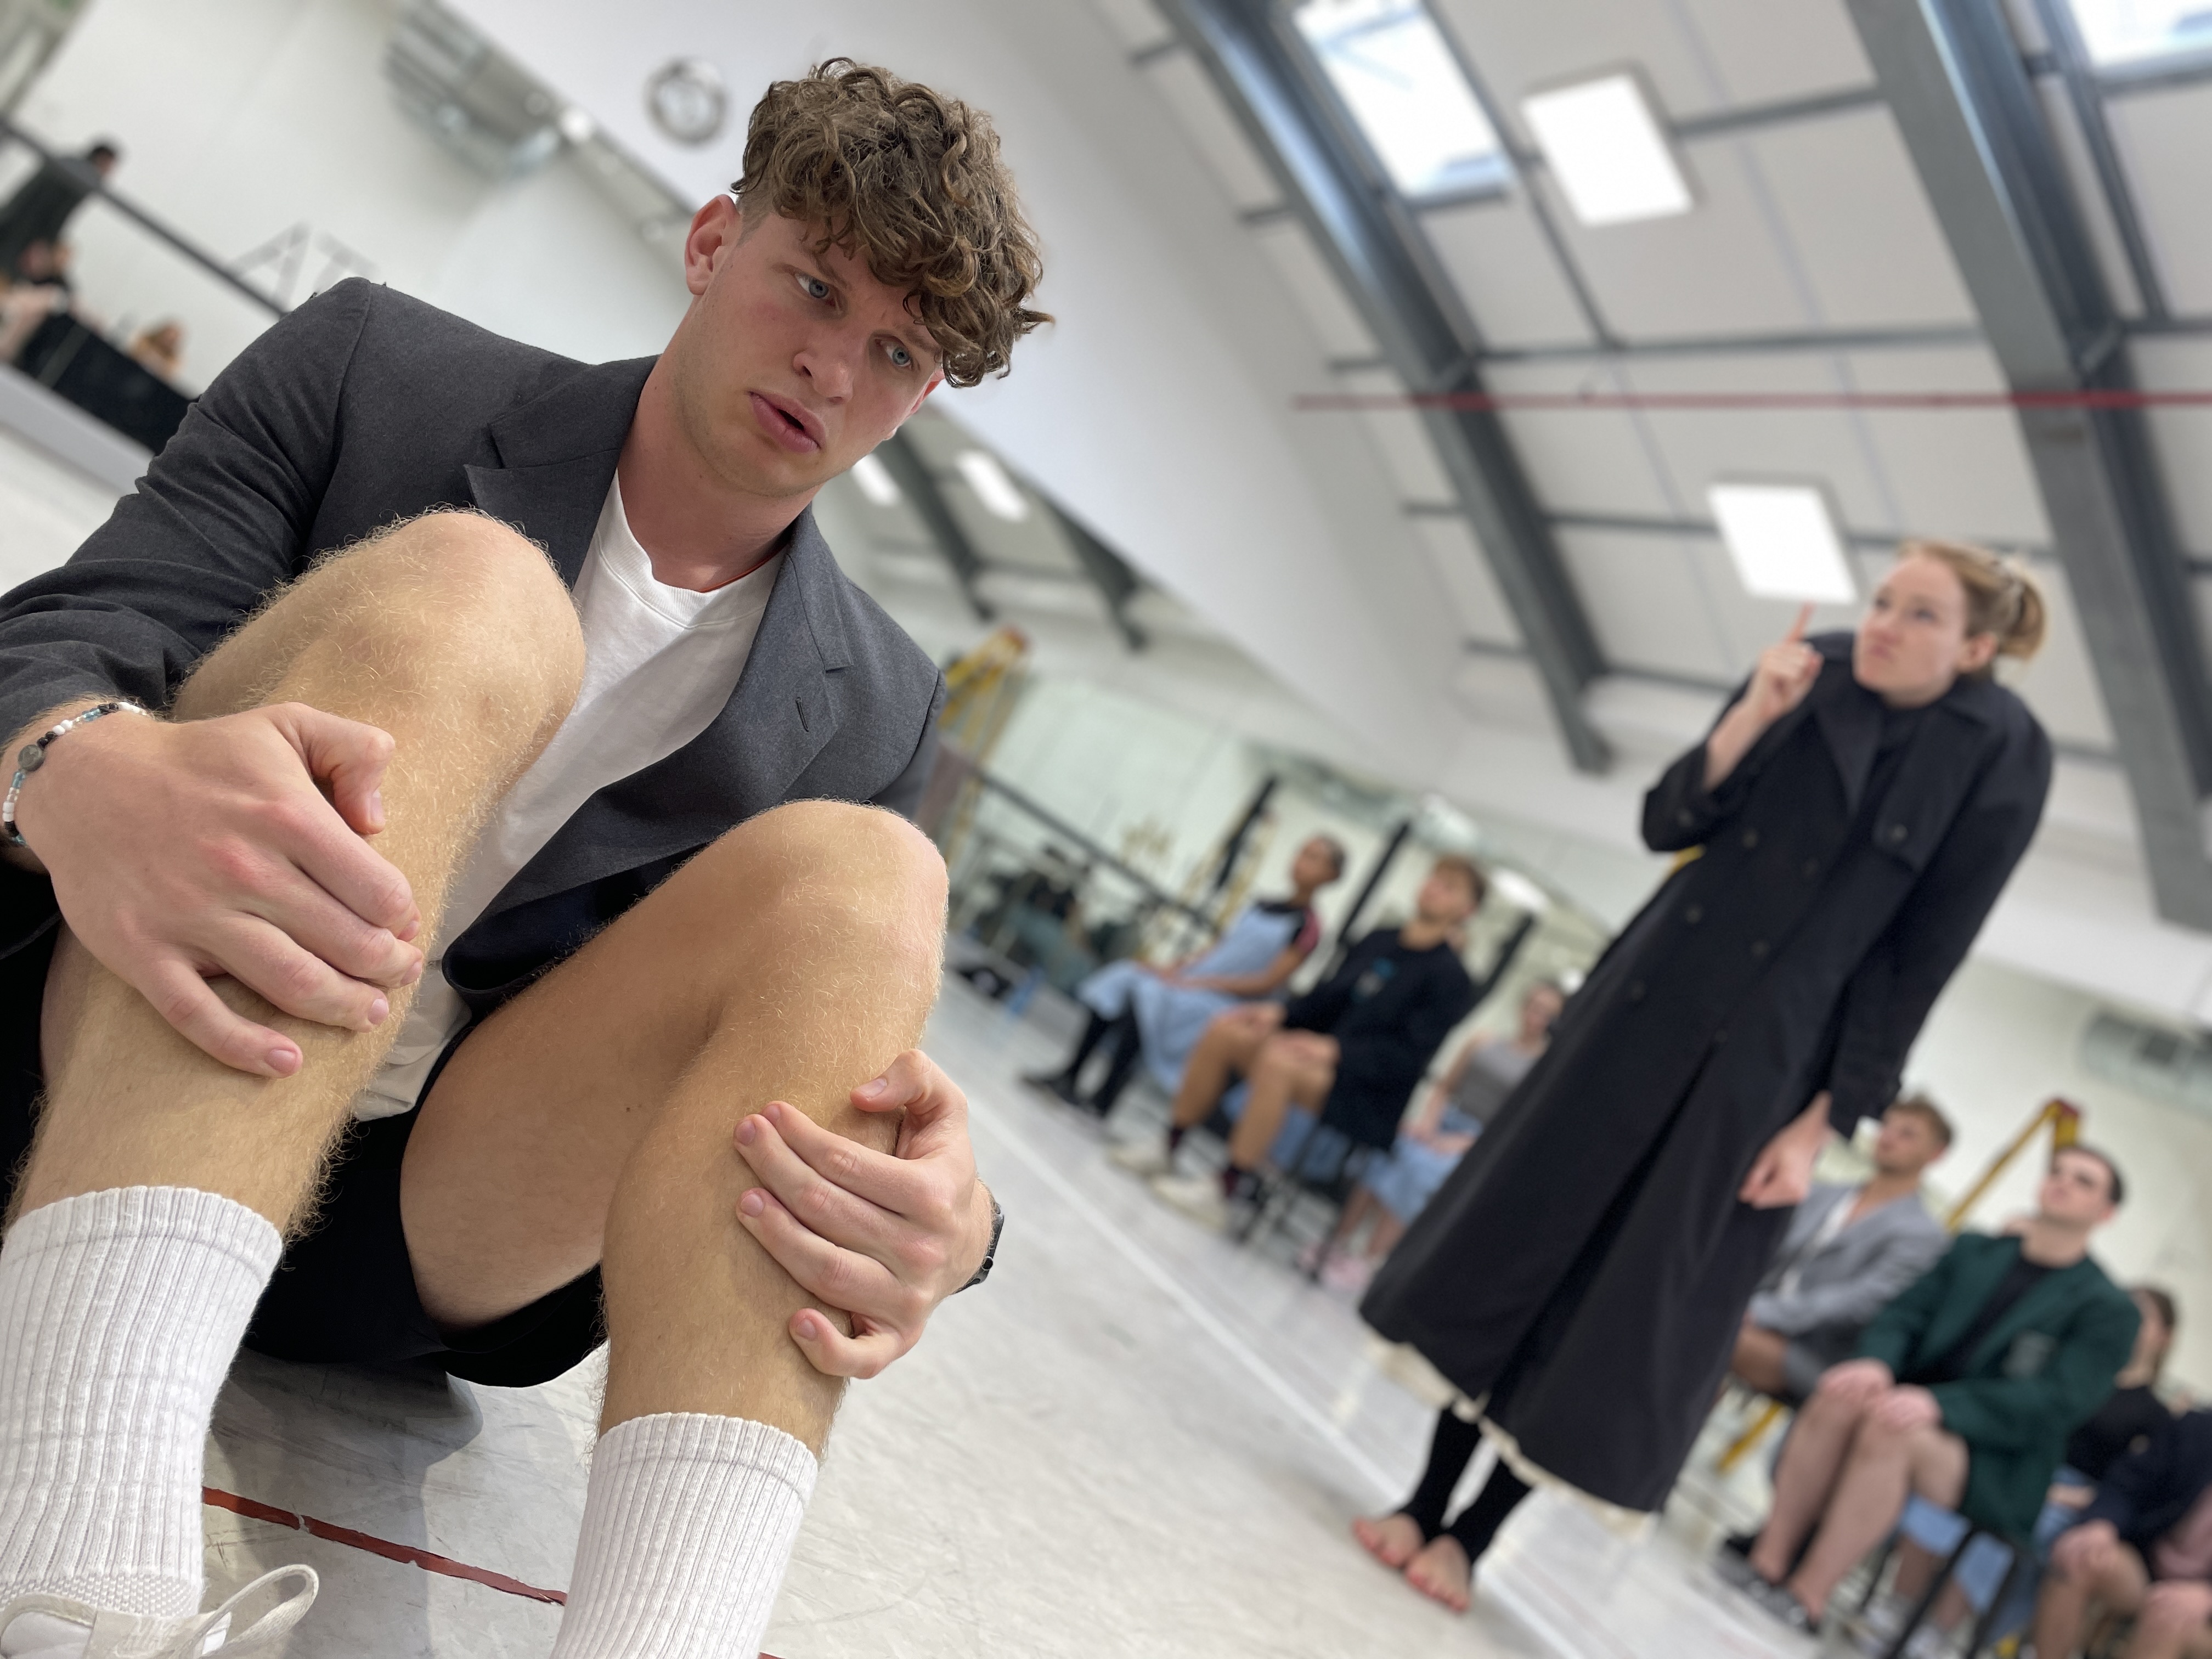 In a rehearsal of 'Spring Awakening', Dylan Janse van Rensburg as Melchior, with one of the ominous and school teachers looming. Image: Duane Alexander